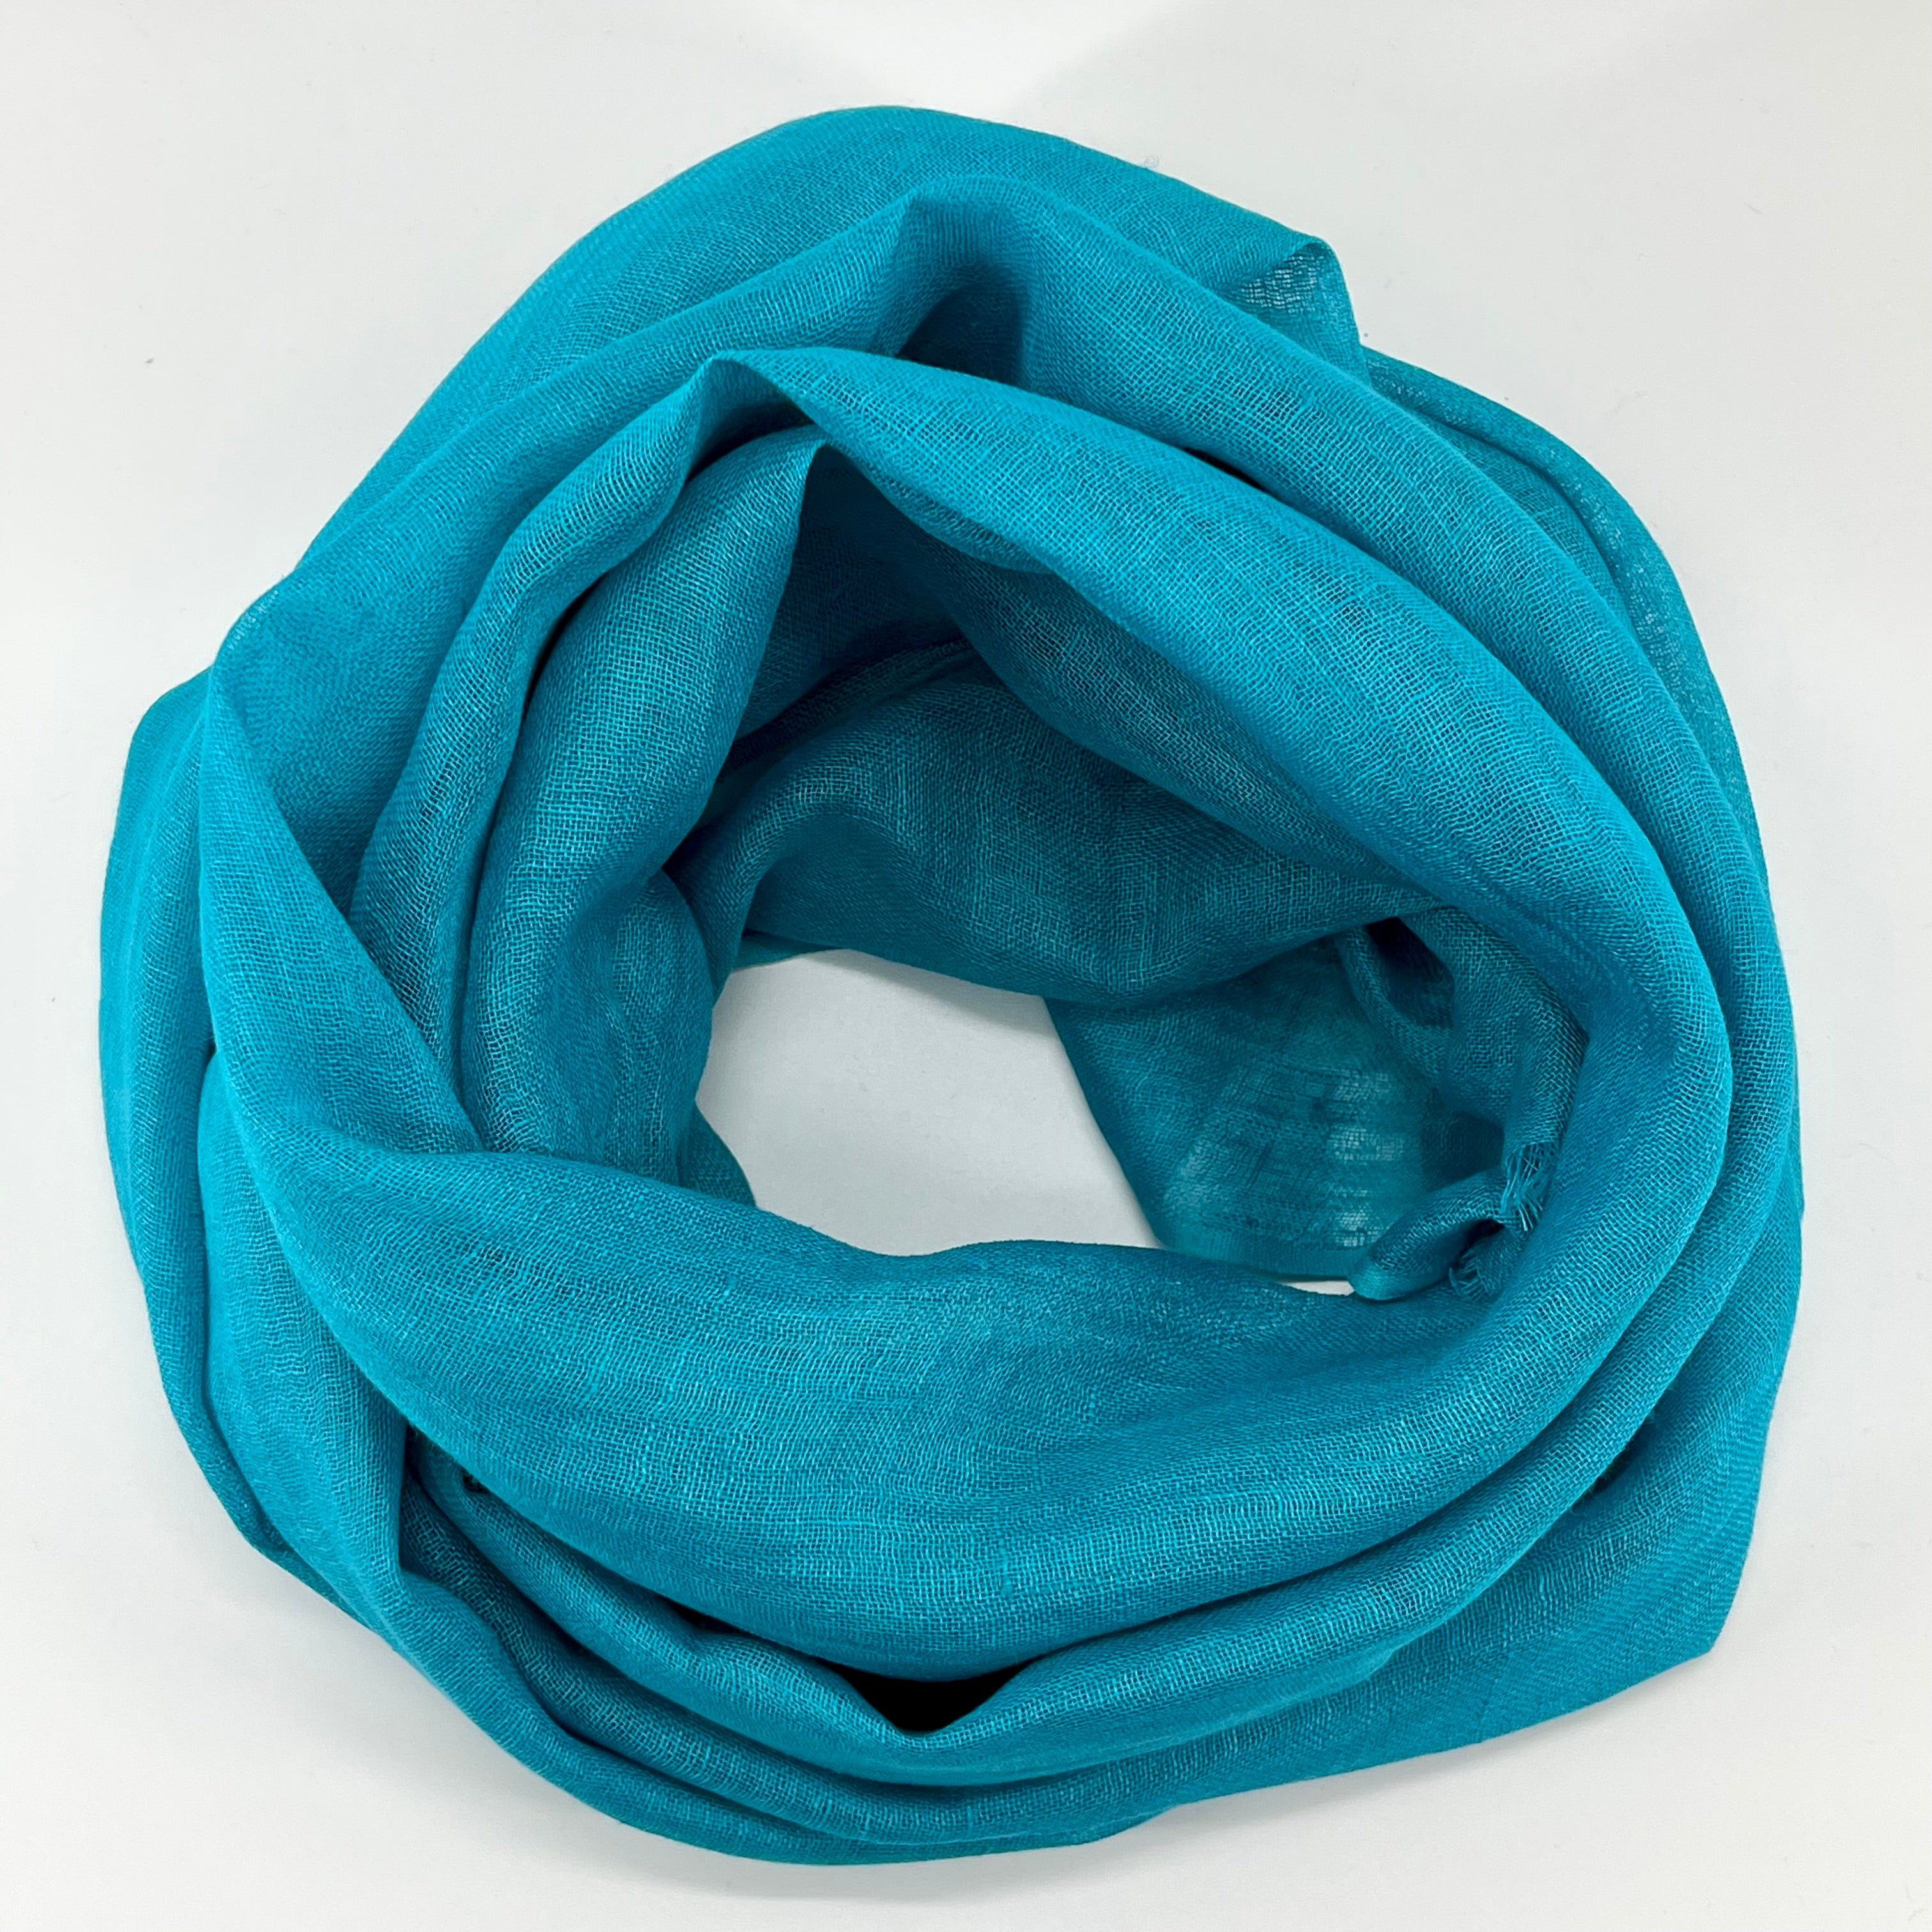 Natural Hand Dyed Linen Scarf : French Blue